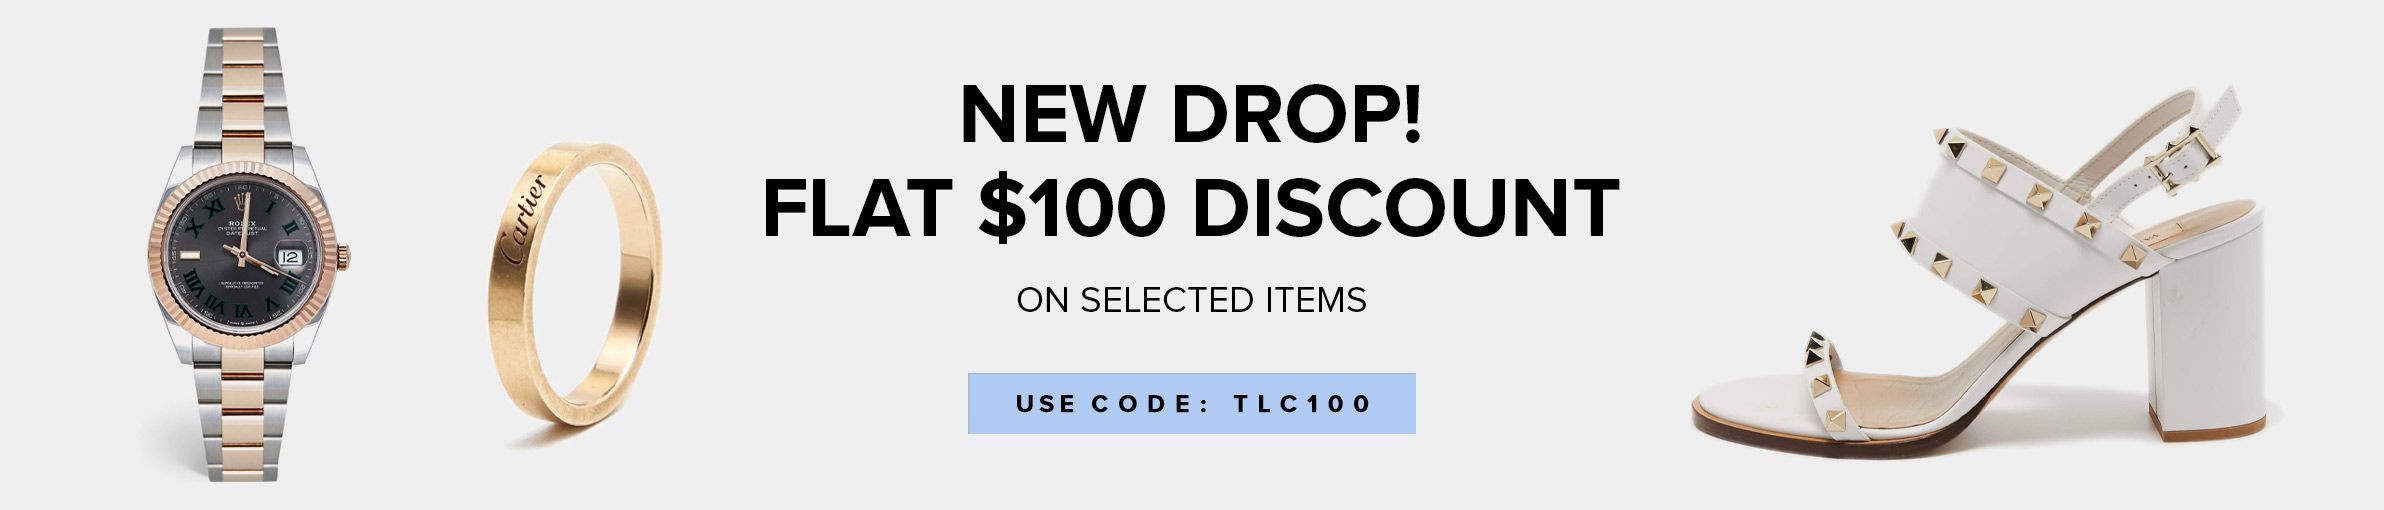 NEW DROP! o S i FLAT $100 DISCOUNT . R ' ON SELECTED ITEMS g Vf USE CODE: TLC100 